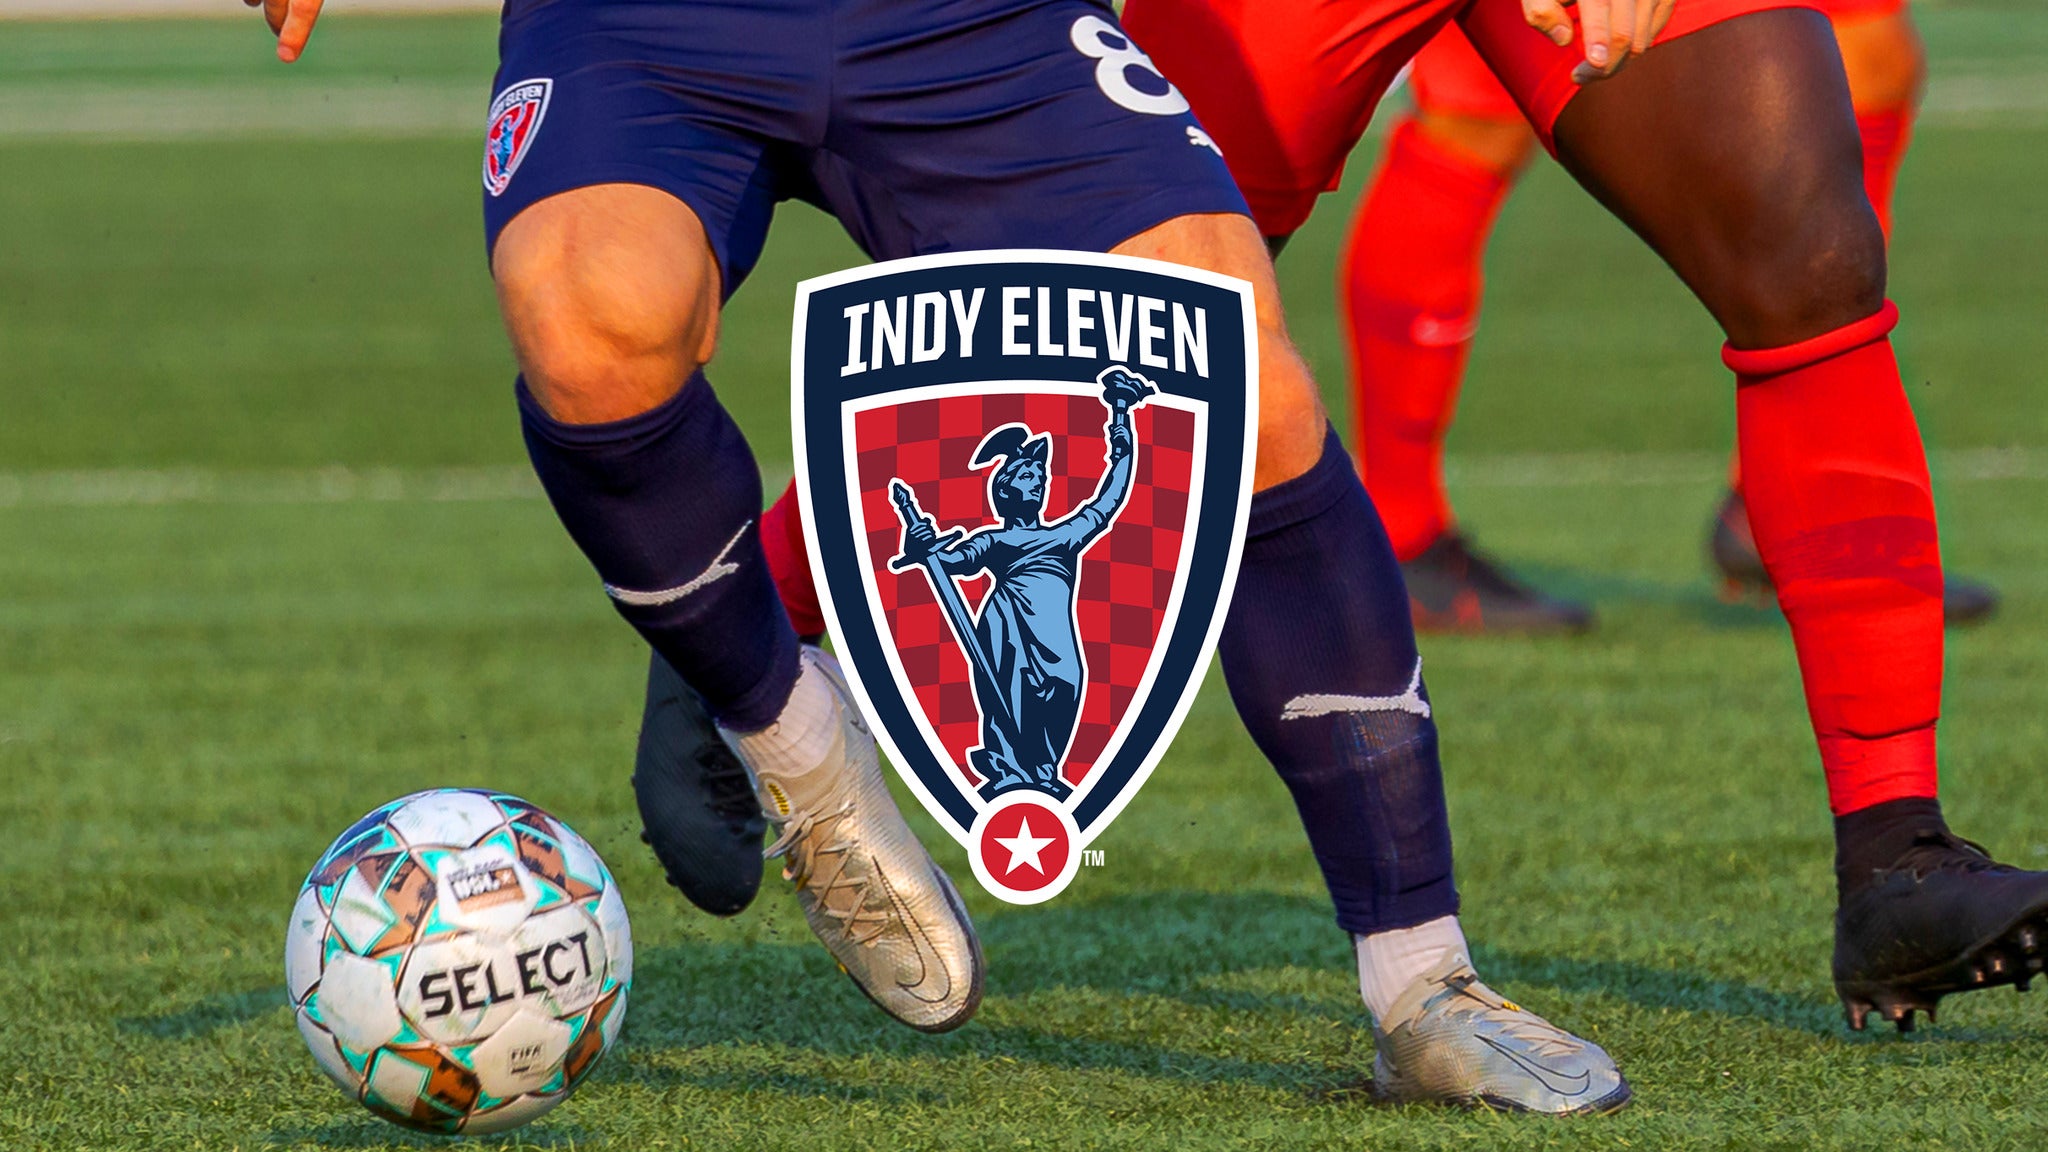 Image used with permission from Ticketmaster | Indy Eleven vs. Miami FC tickets